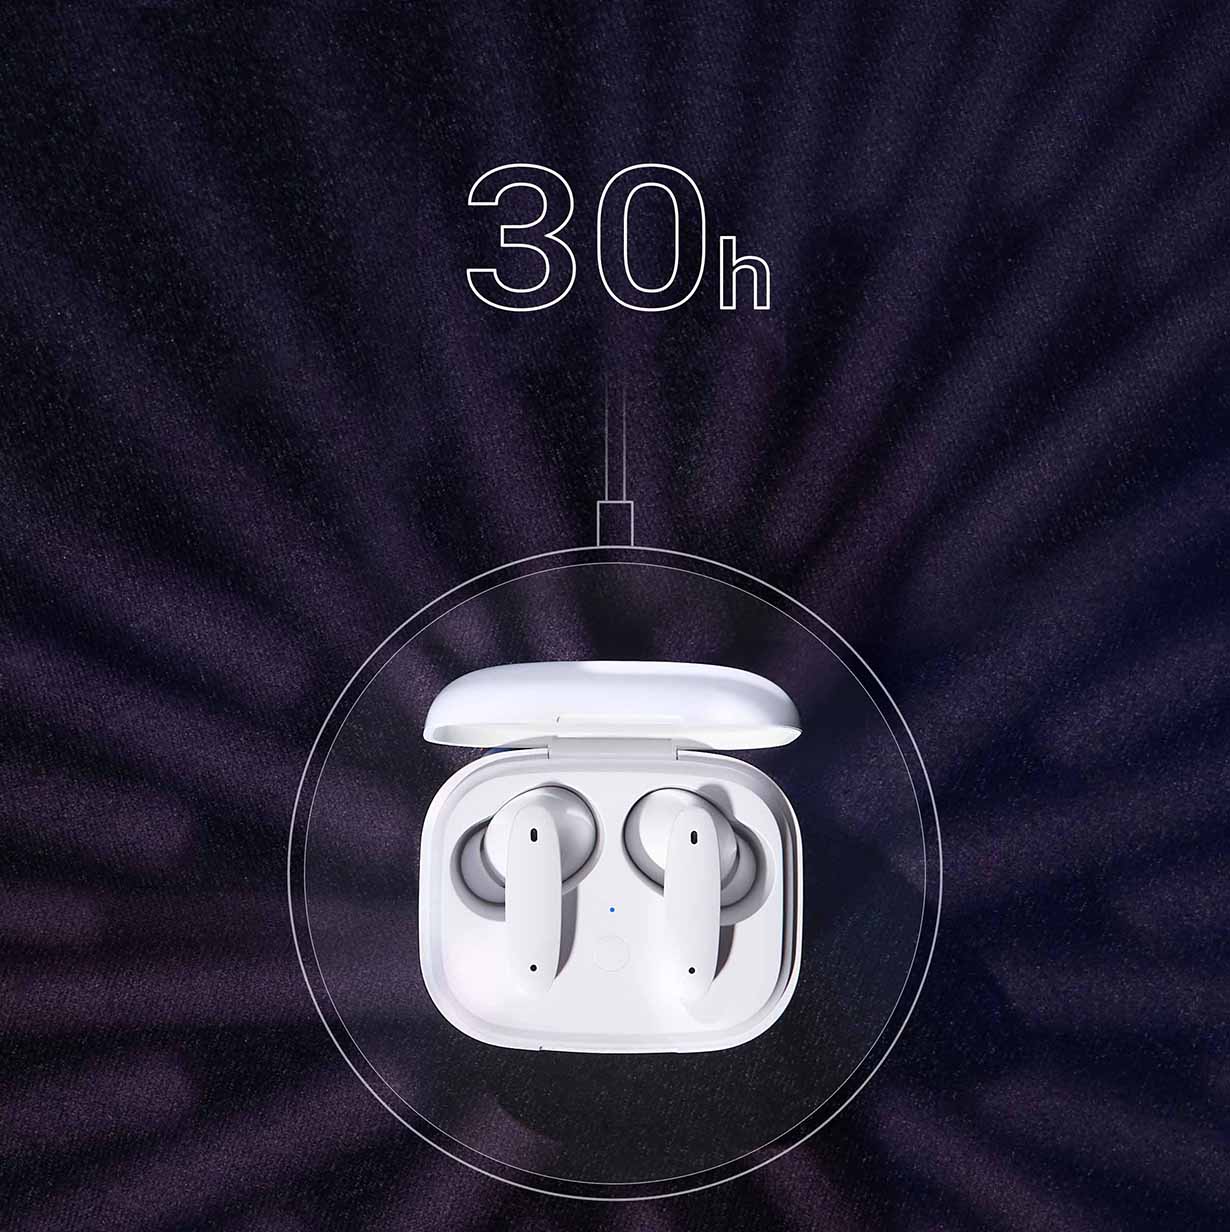 MEIZU Mblu Blus Active Noise Cancelling True Wireless Earbuds